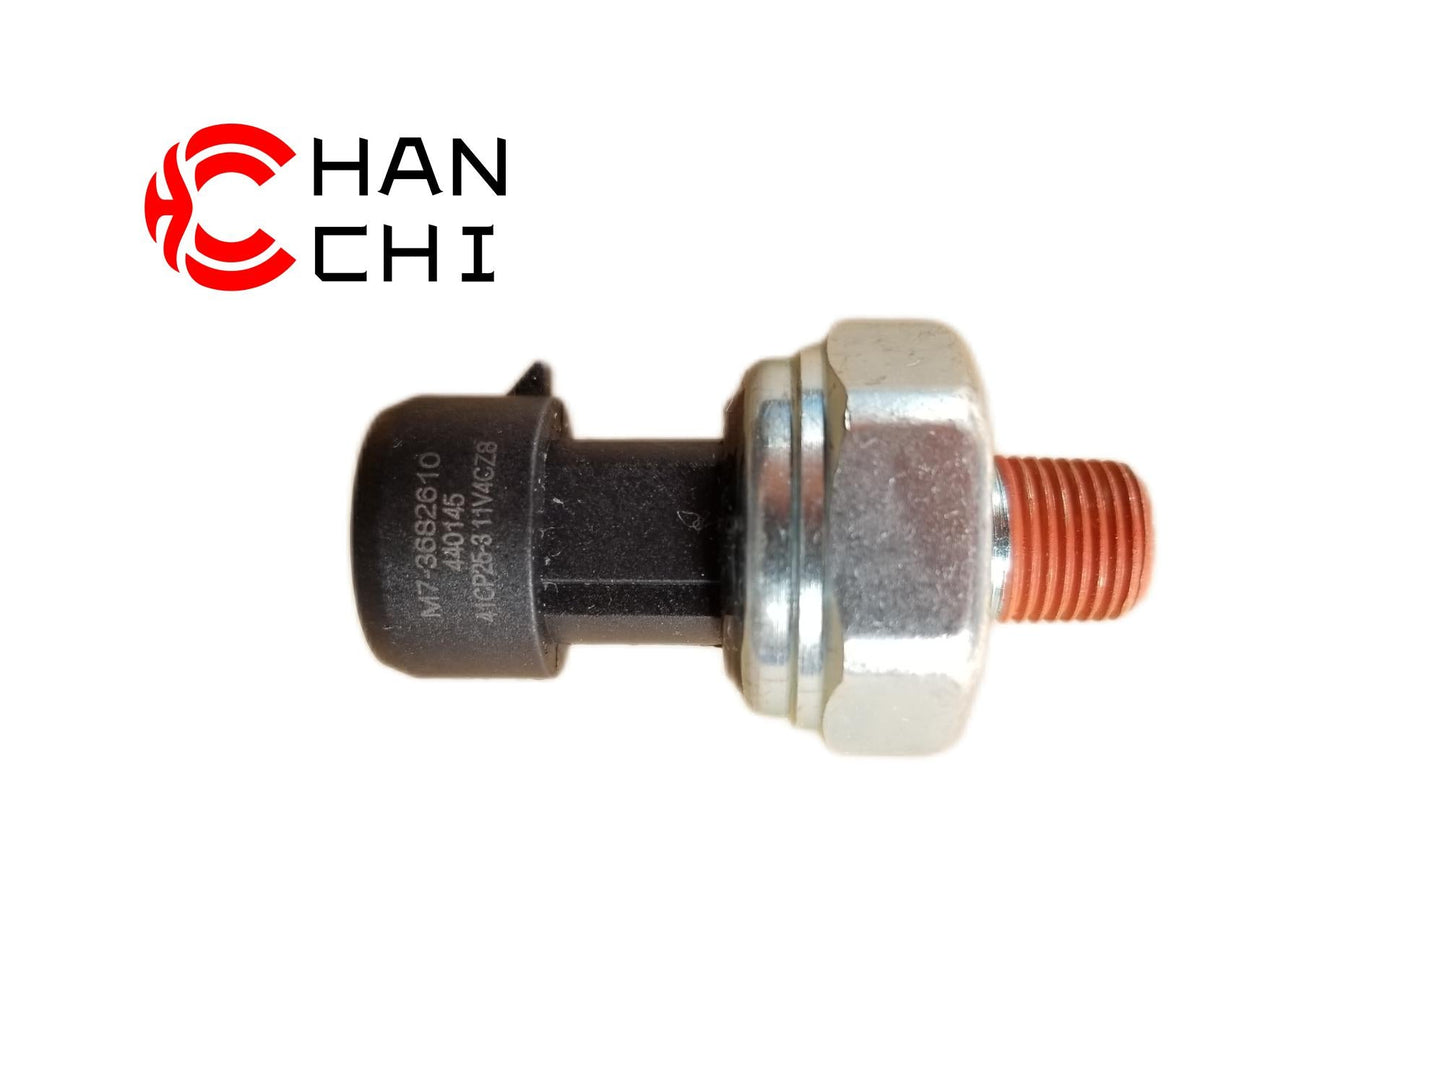 【Description】---☀Welcome to HANCHI☀---✔Good Quality✔Generally Applicability✔Competitive PriceEnjoy your shopping time↖（^ω^）↗【Features】Brand-New with High Quality for the Aftermarket.Totally mathced your need.**Stable Quality**High Precision**Easy Installation**【Specification】OEM: M7-3682610 41CP25-3Material: metalColor: silverOrigin: Made in ChinaWeight: 100g【Packing List】1* Gas Pressure Sensor 【More Service】 We can provide OEM Manufacturing service We can Be your one-step solution for Auto Part